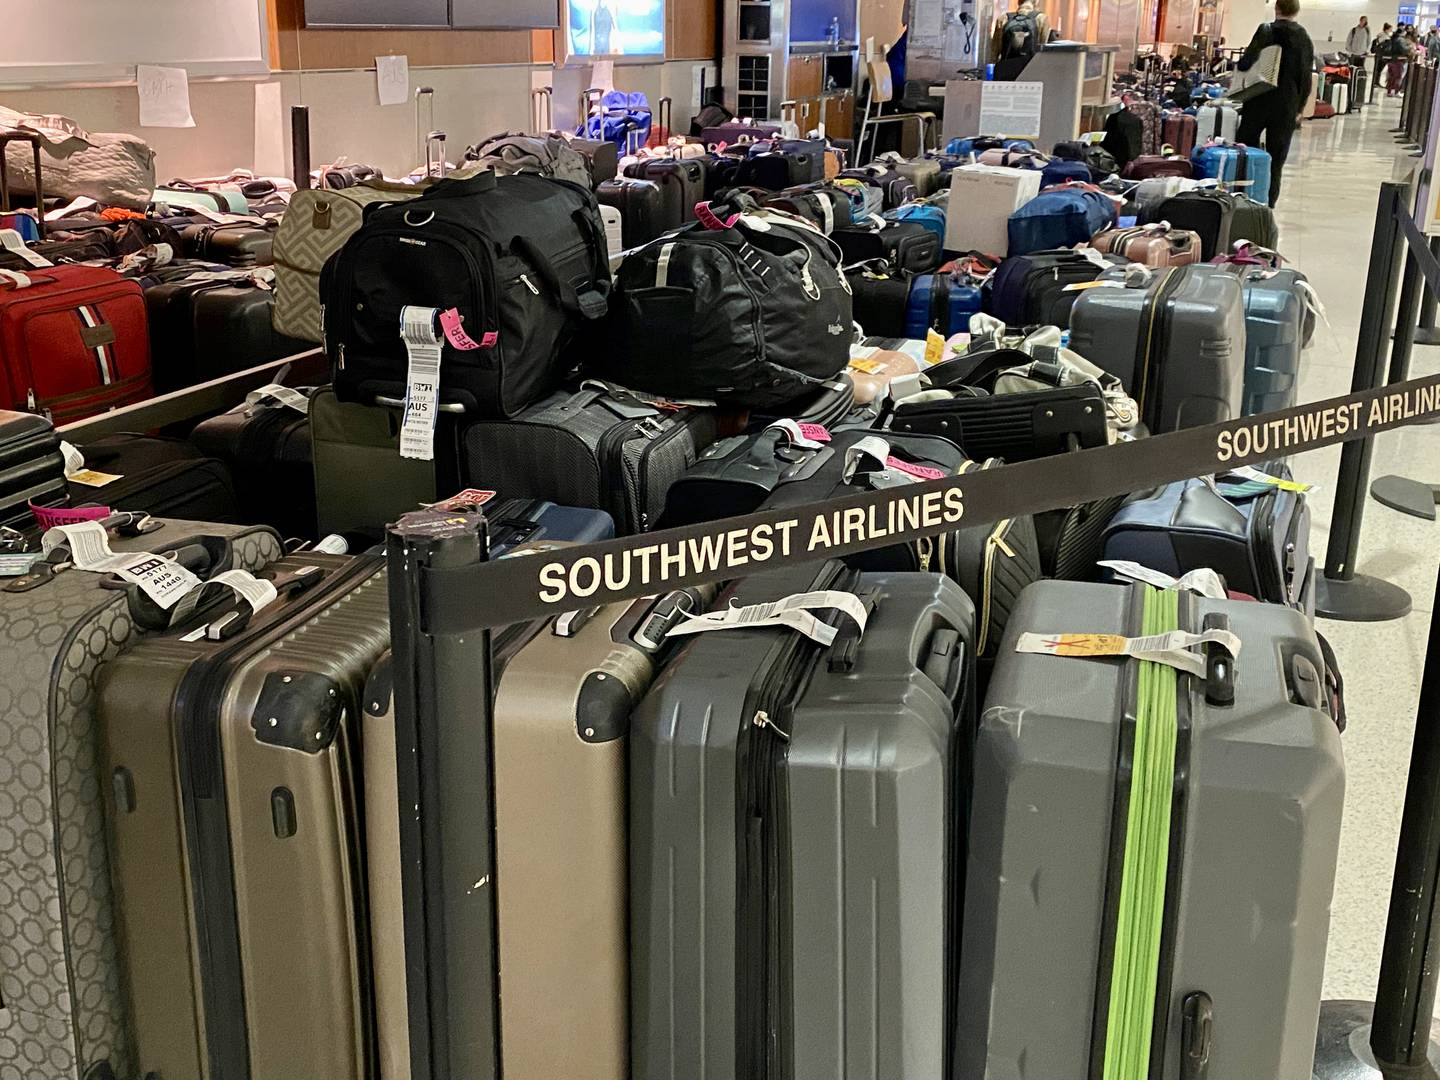 Hundreds of suitcases sit at BWI waiting for their owners after the cancellations and delays of thousands of Southwest Airline flights caused massive disruption across the country.